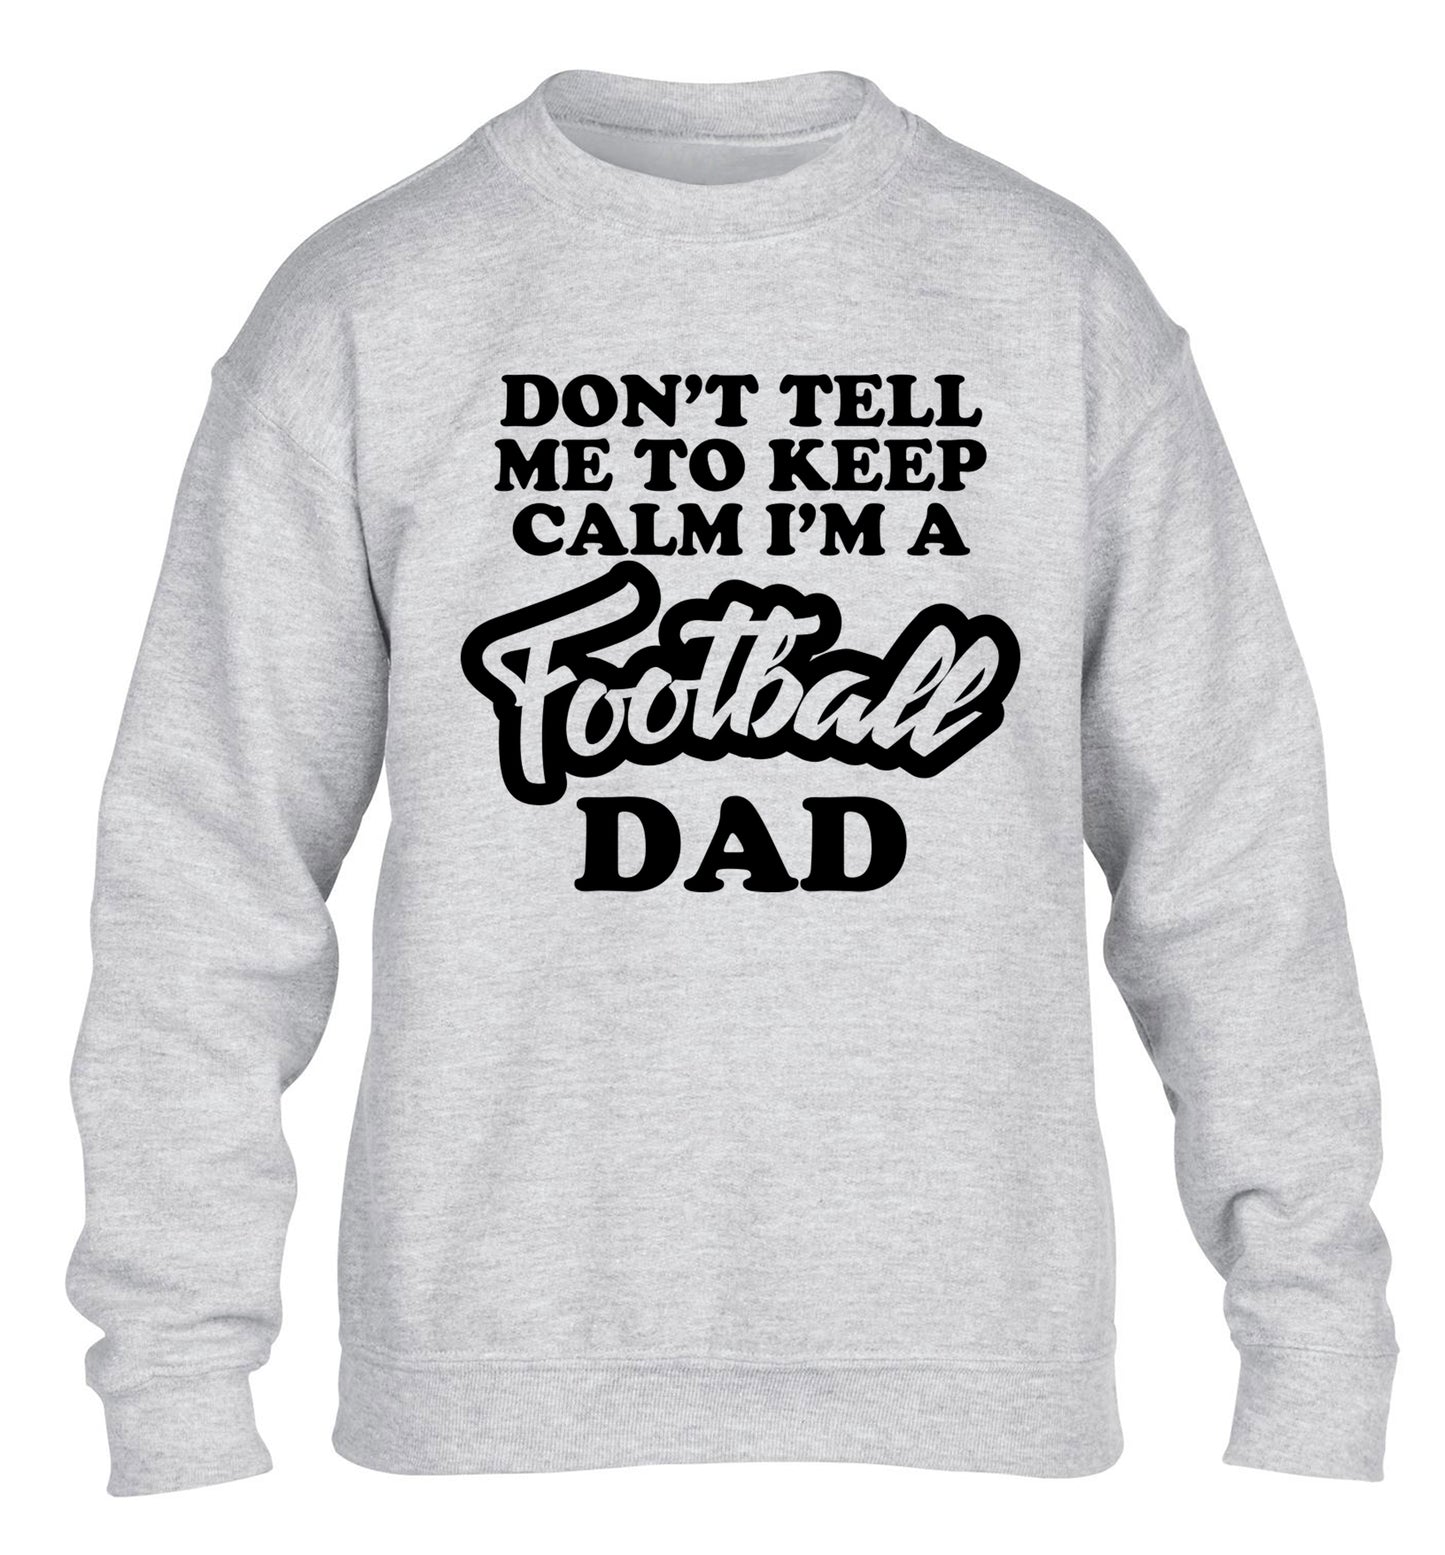 Don't tell me to keep calm I'm a football grandad children's grey sweater 12-14 Years